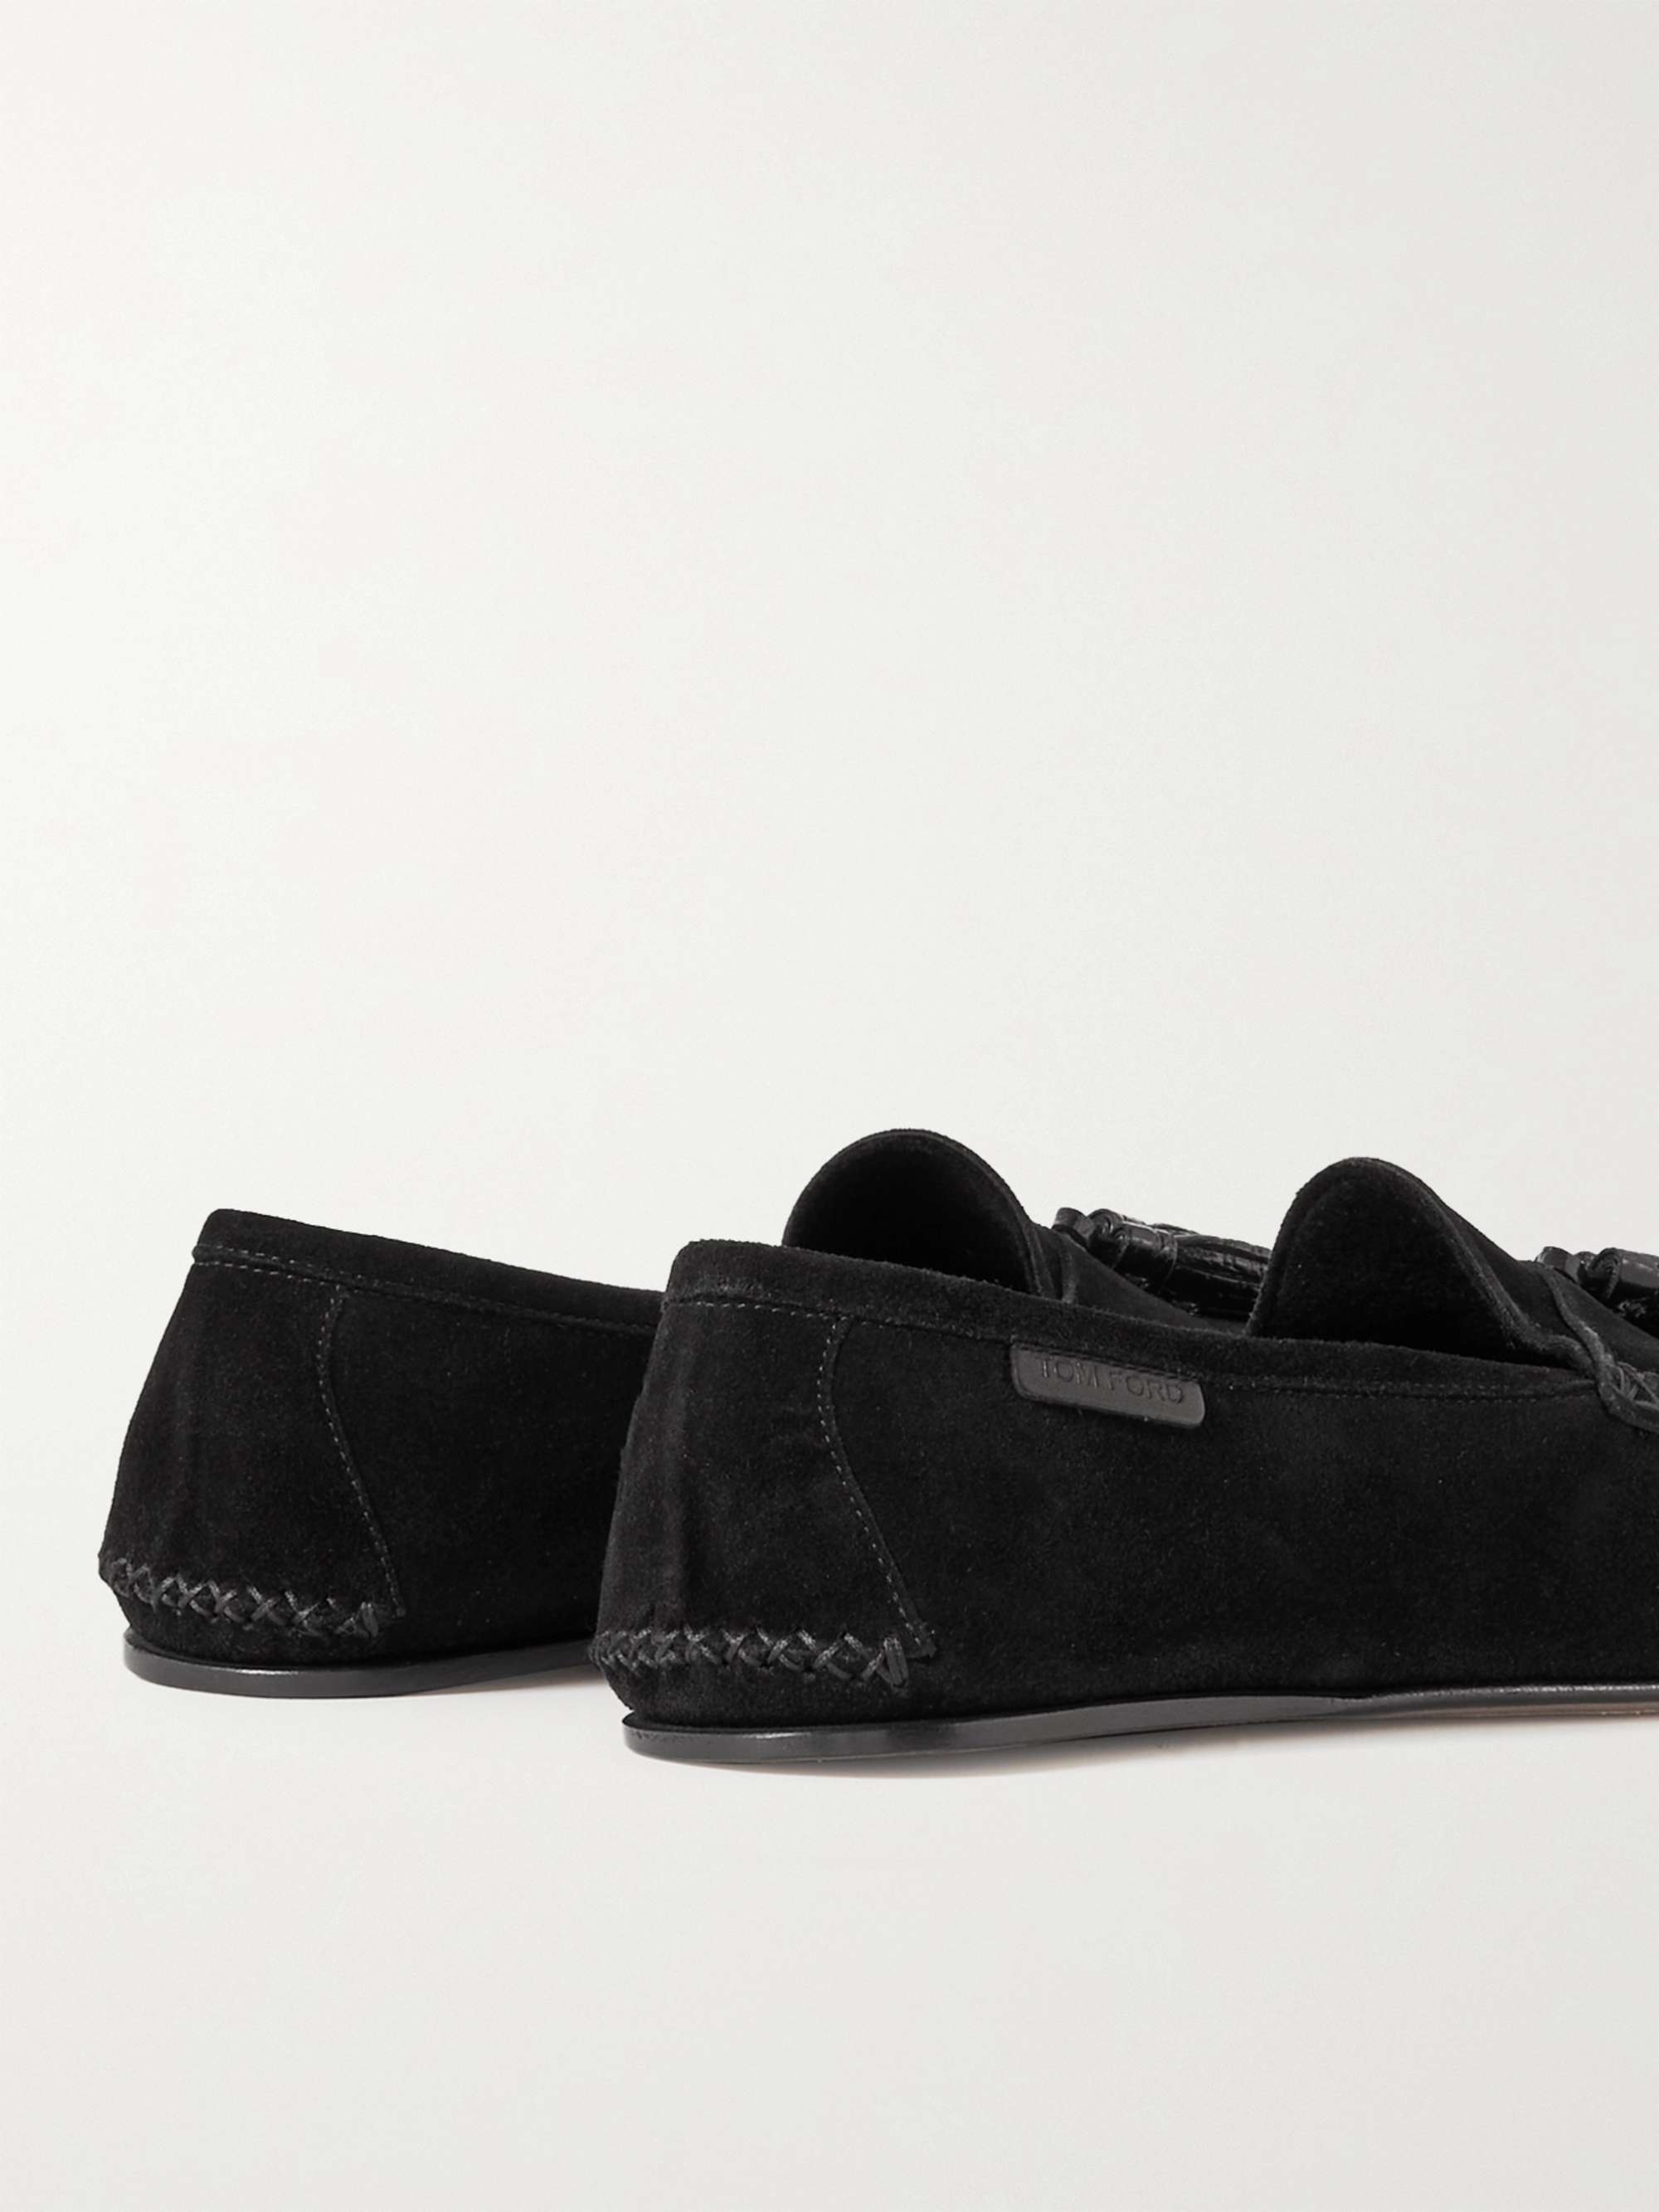 TOM FORD Berwick Leather-Trimmed Tassled Suede Loafers